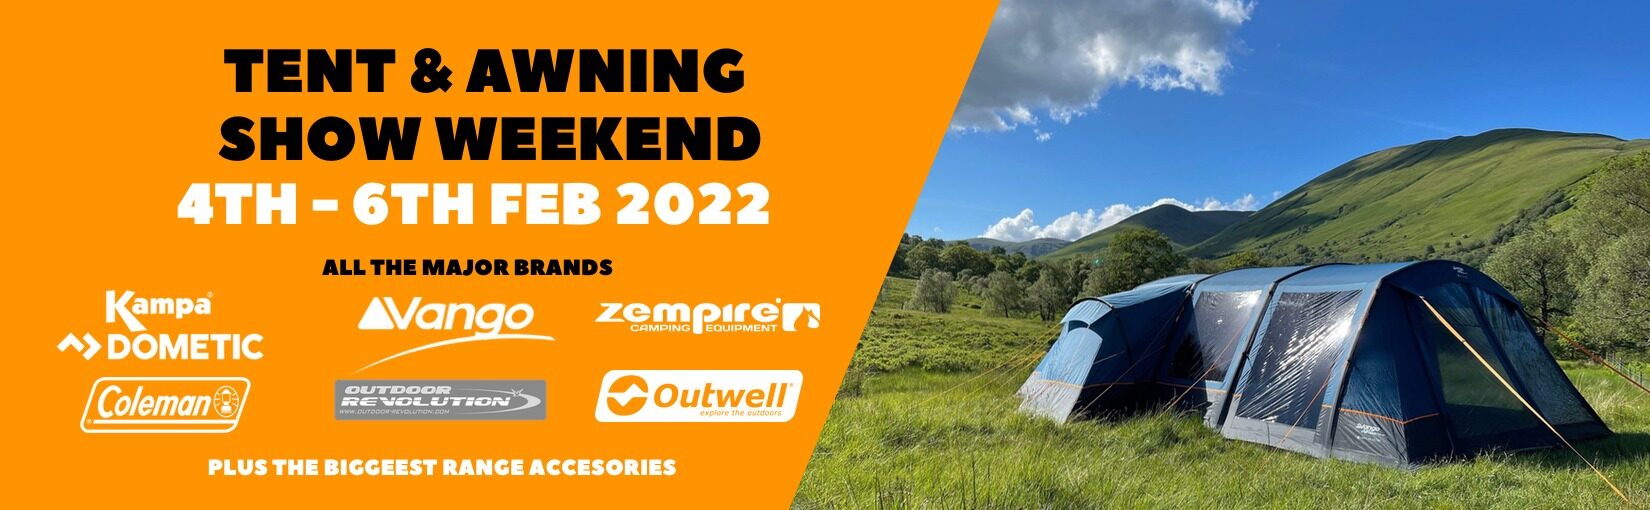 Tent And Awning Show Weekend Web Banner 2022